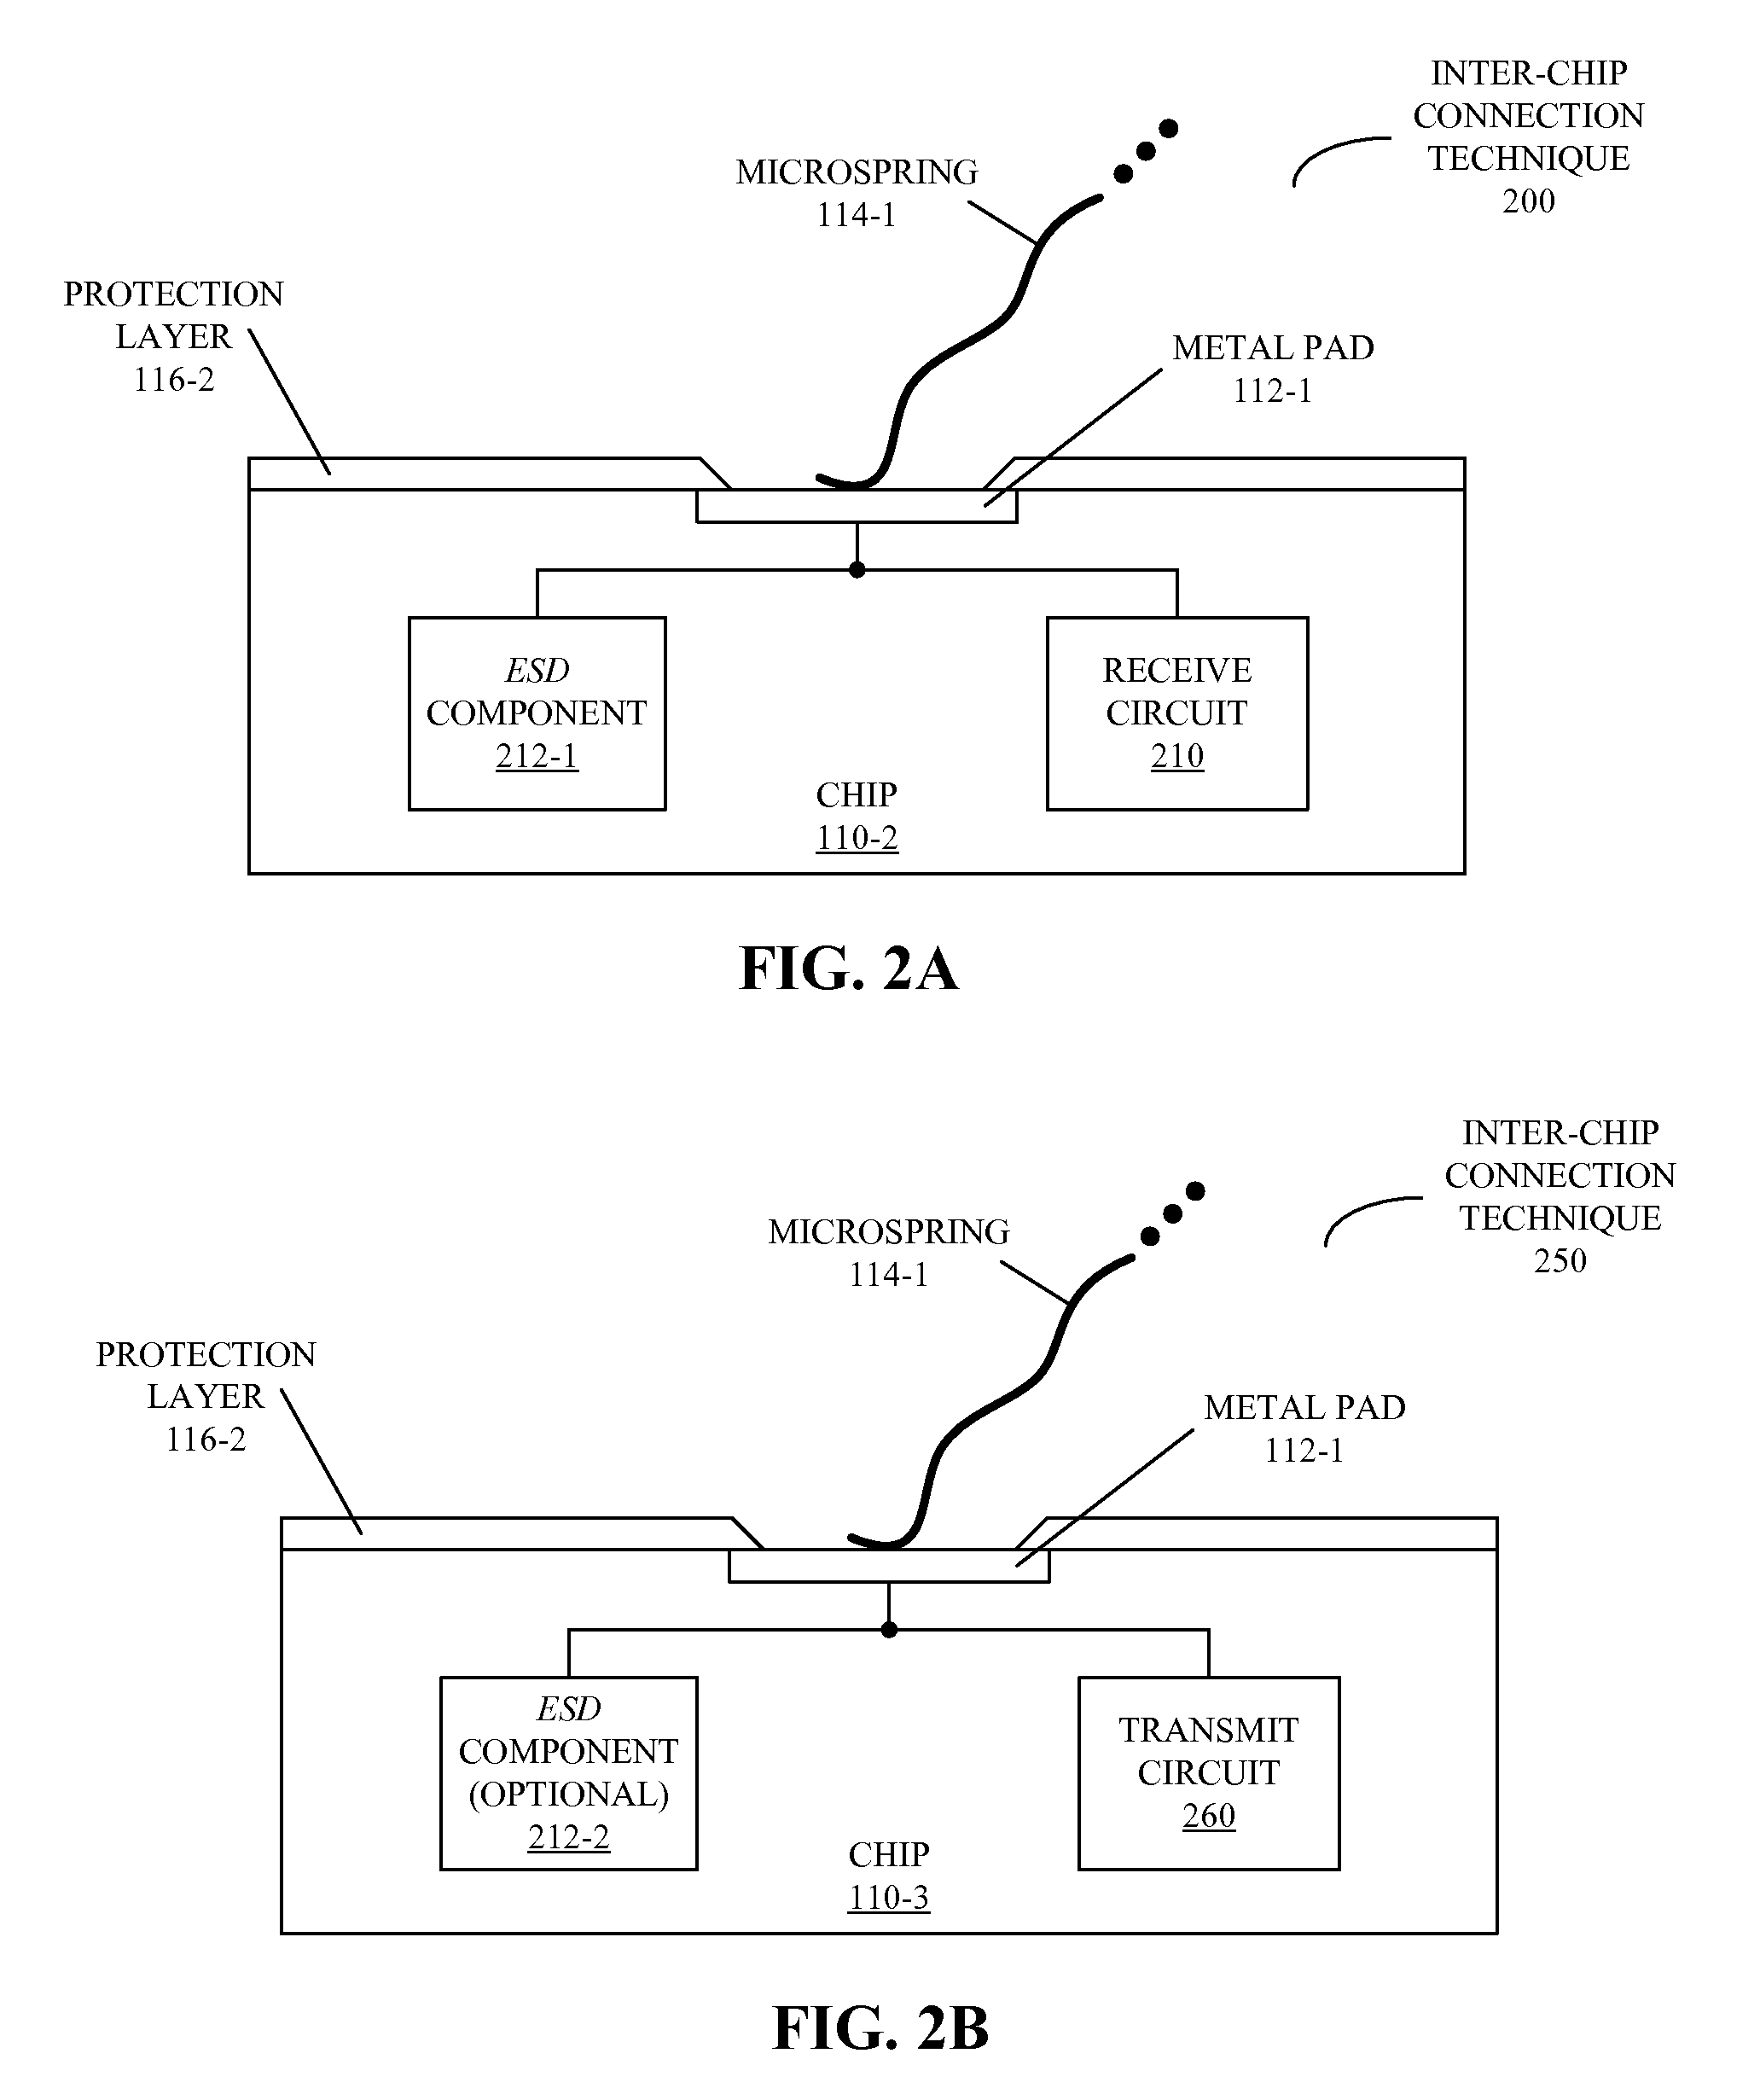 Receive circuit for connectors with variable complex impedance